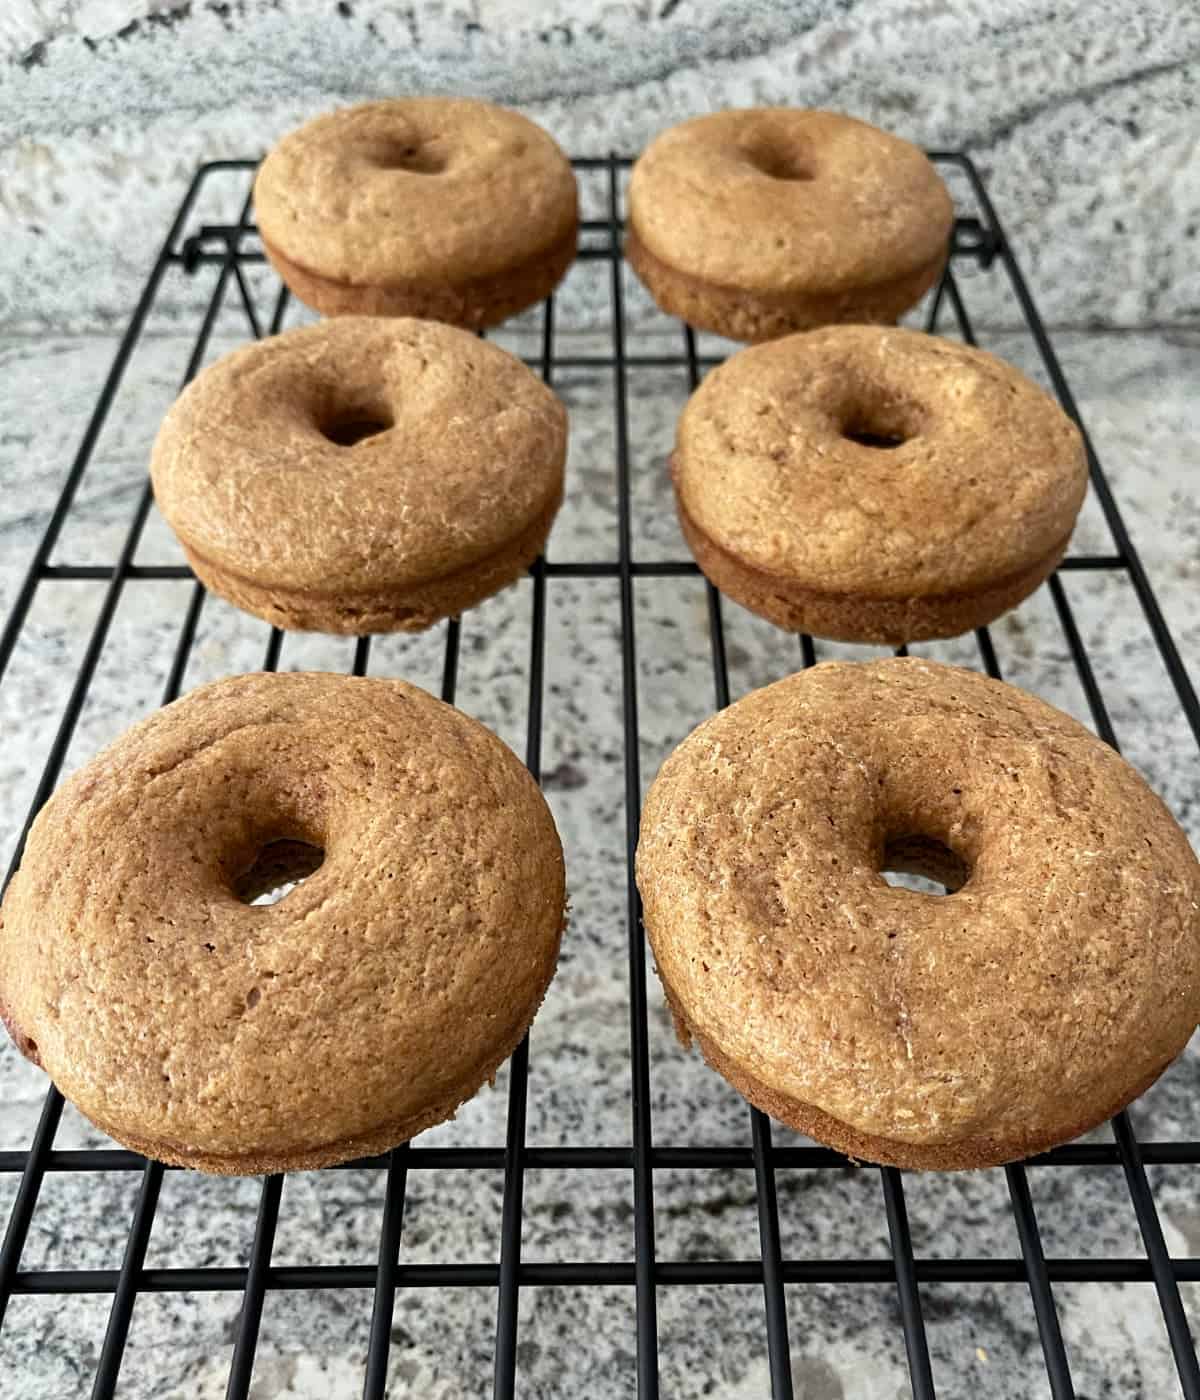 Baked whole wheat donuts cooling on wire rack.